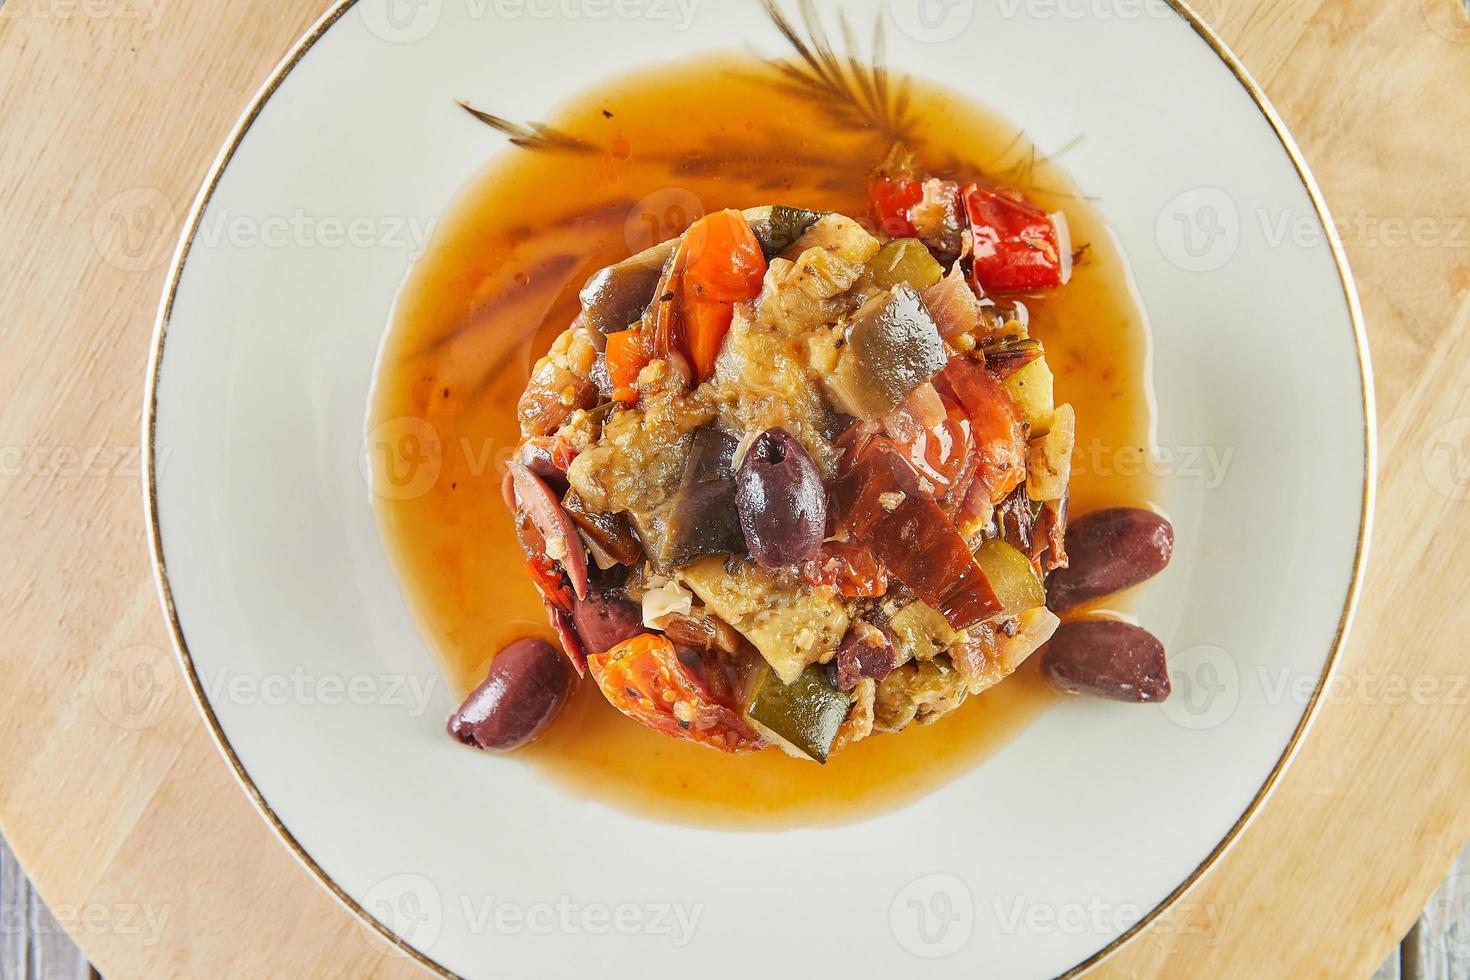 Ratatouille Ragout with zucchini, zucchini, eggplant, peppers and cherry tomatoes. Decorated with olives. French gourmet cuisine photo